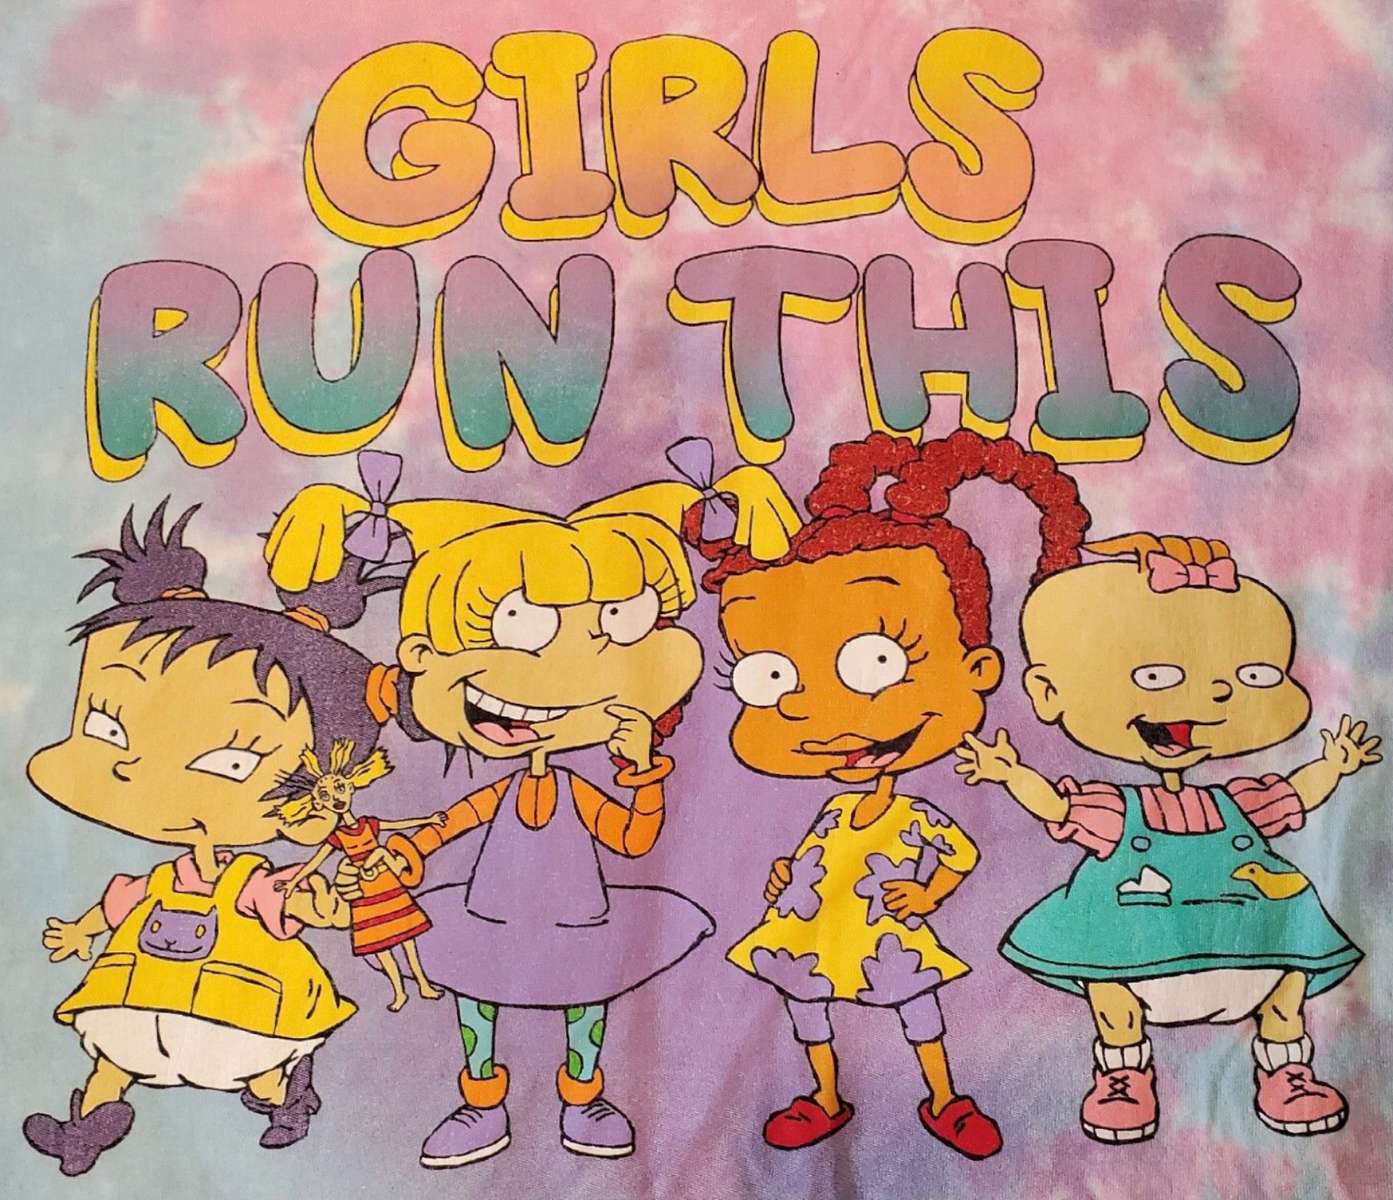 Rugrats - Girls Run This❤️❤️❤️❤️❤️❤️ online puzzle